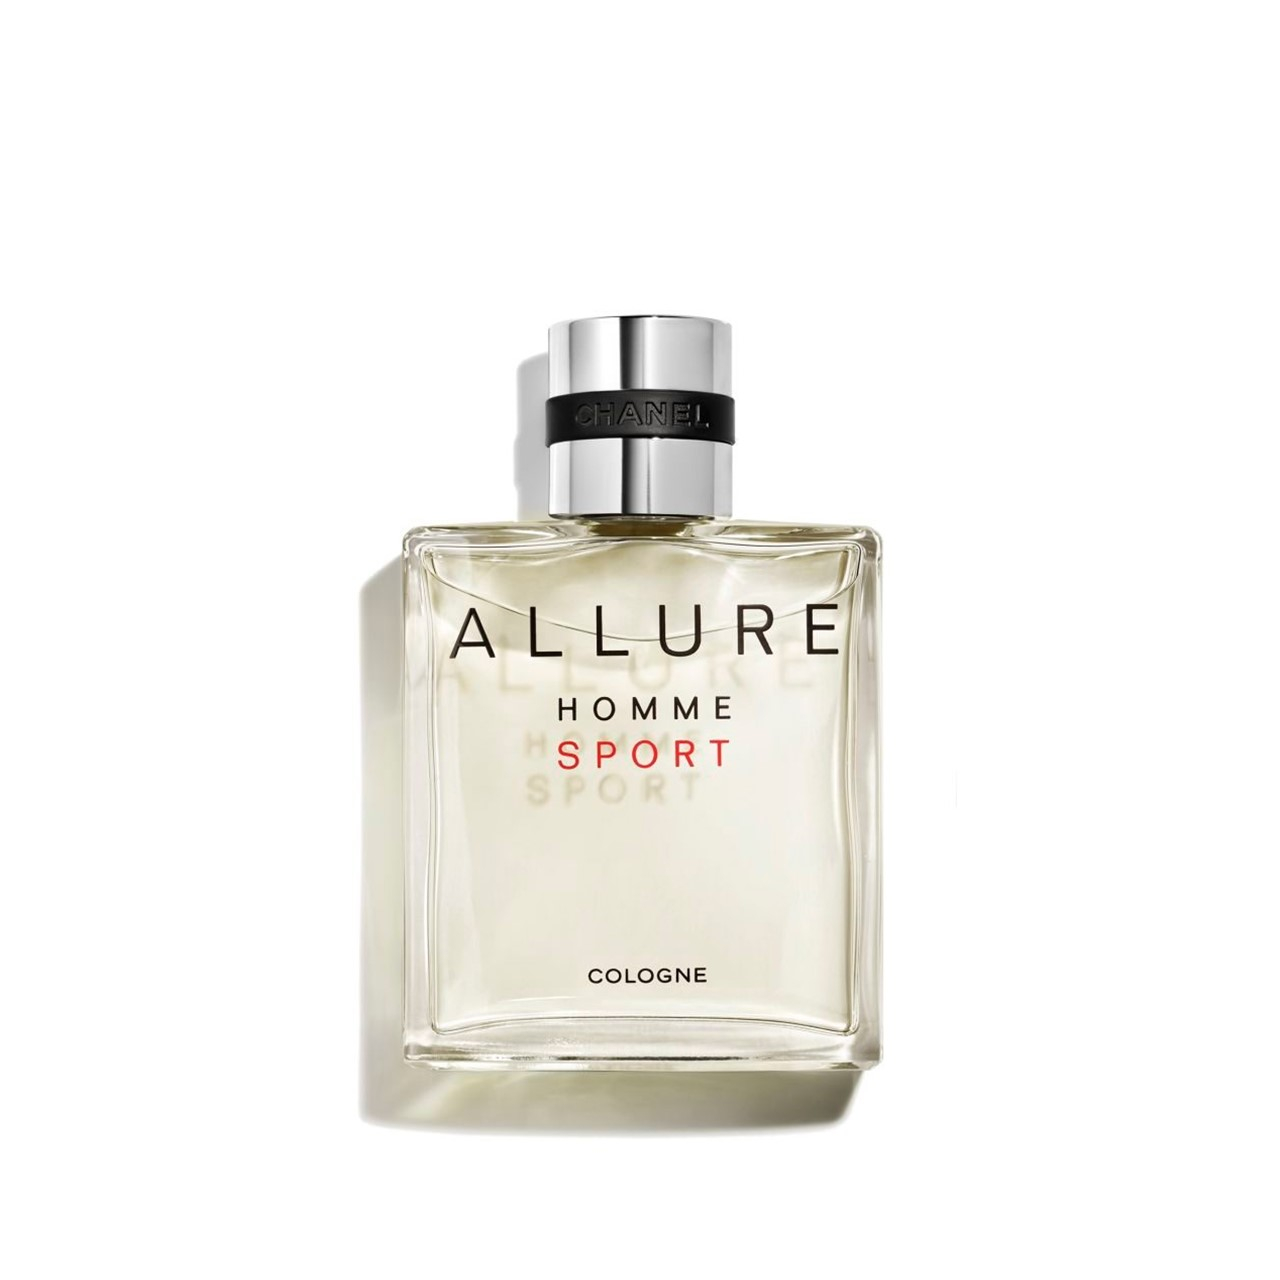 CHANEL Allure Homme Sport Cologne 100ml